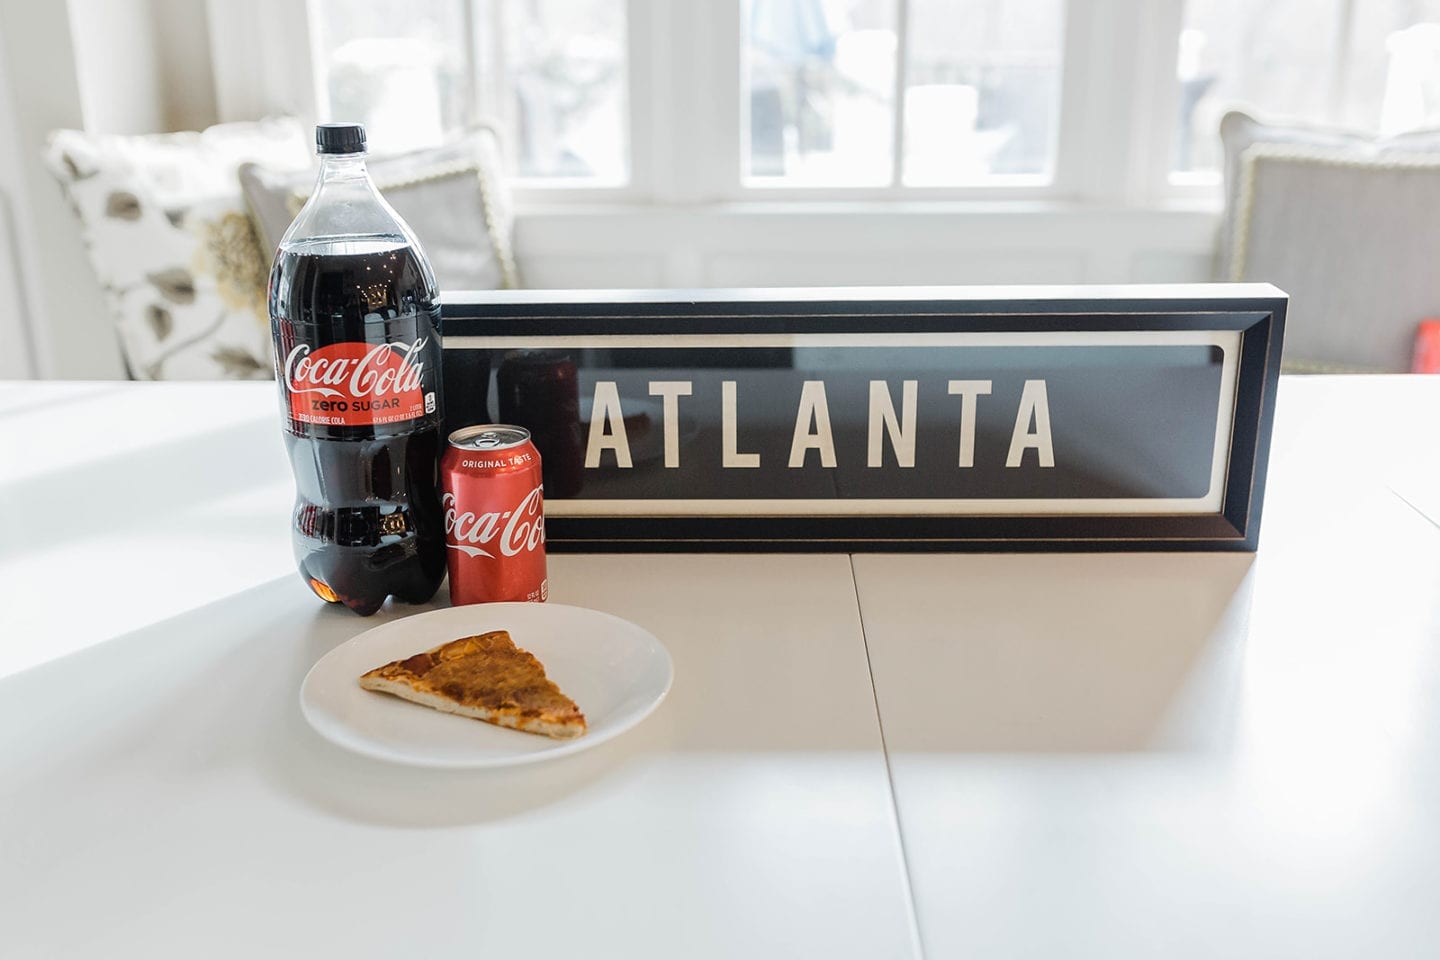 Atlanta based coke and homemade pizza? Yes please! Throw a fun Super Bowl party and have our guests make their own pizza. Use some paper plates and you've got the easiest party to set up for, serve and clean up after!